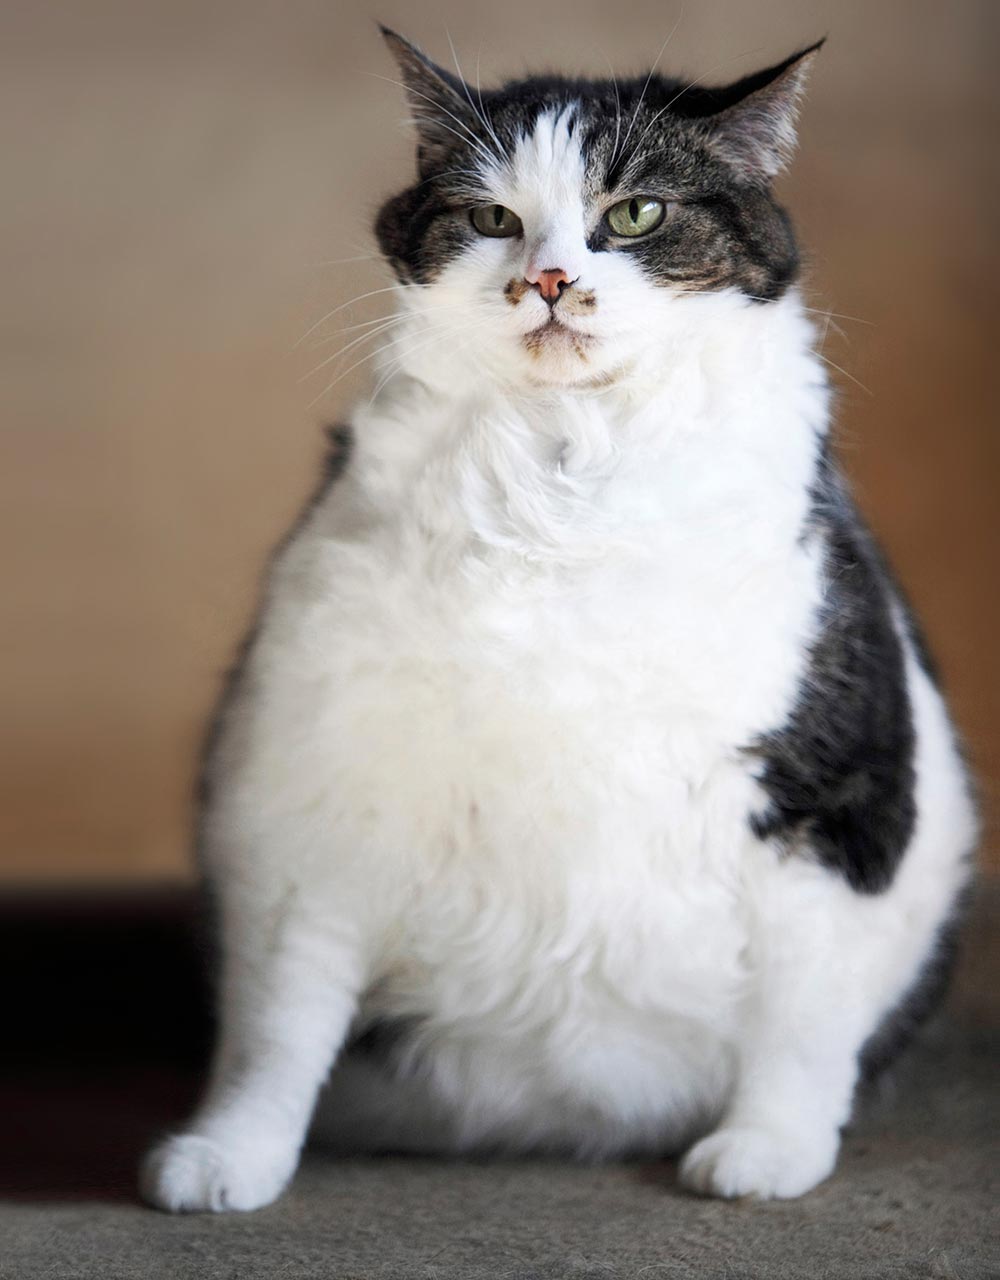 Overweight animals feel more pain from OA. Image © RSPCA